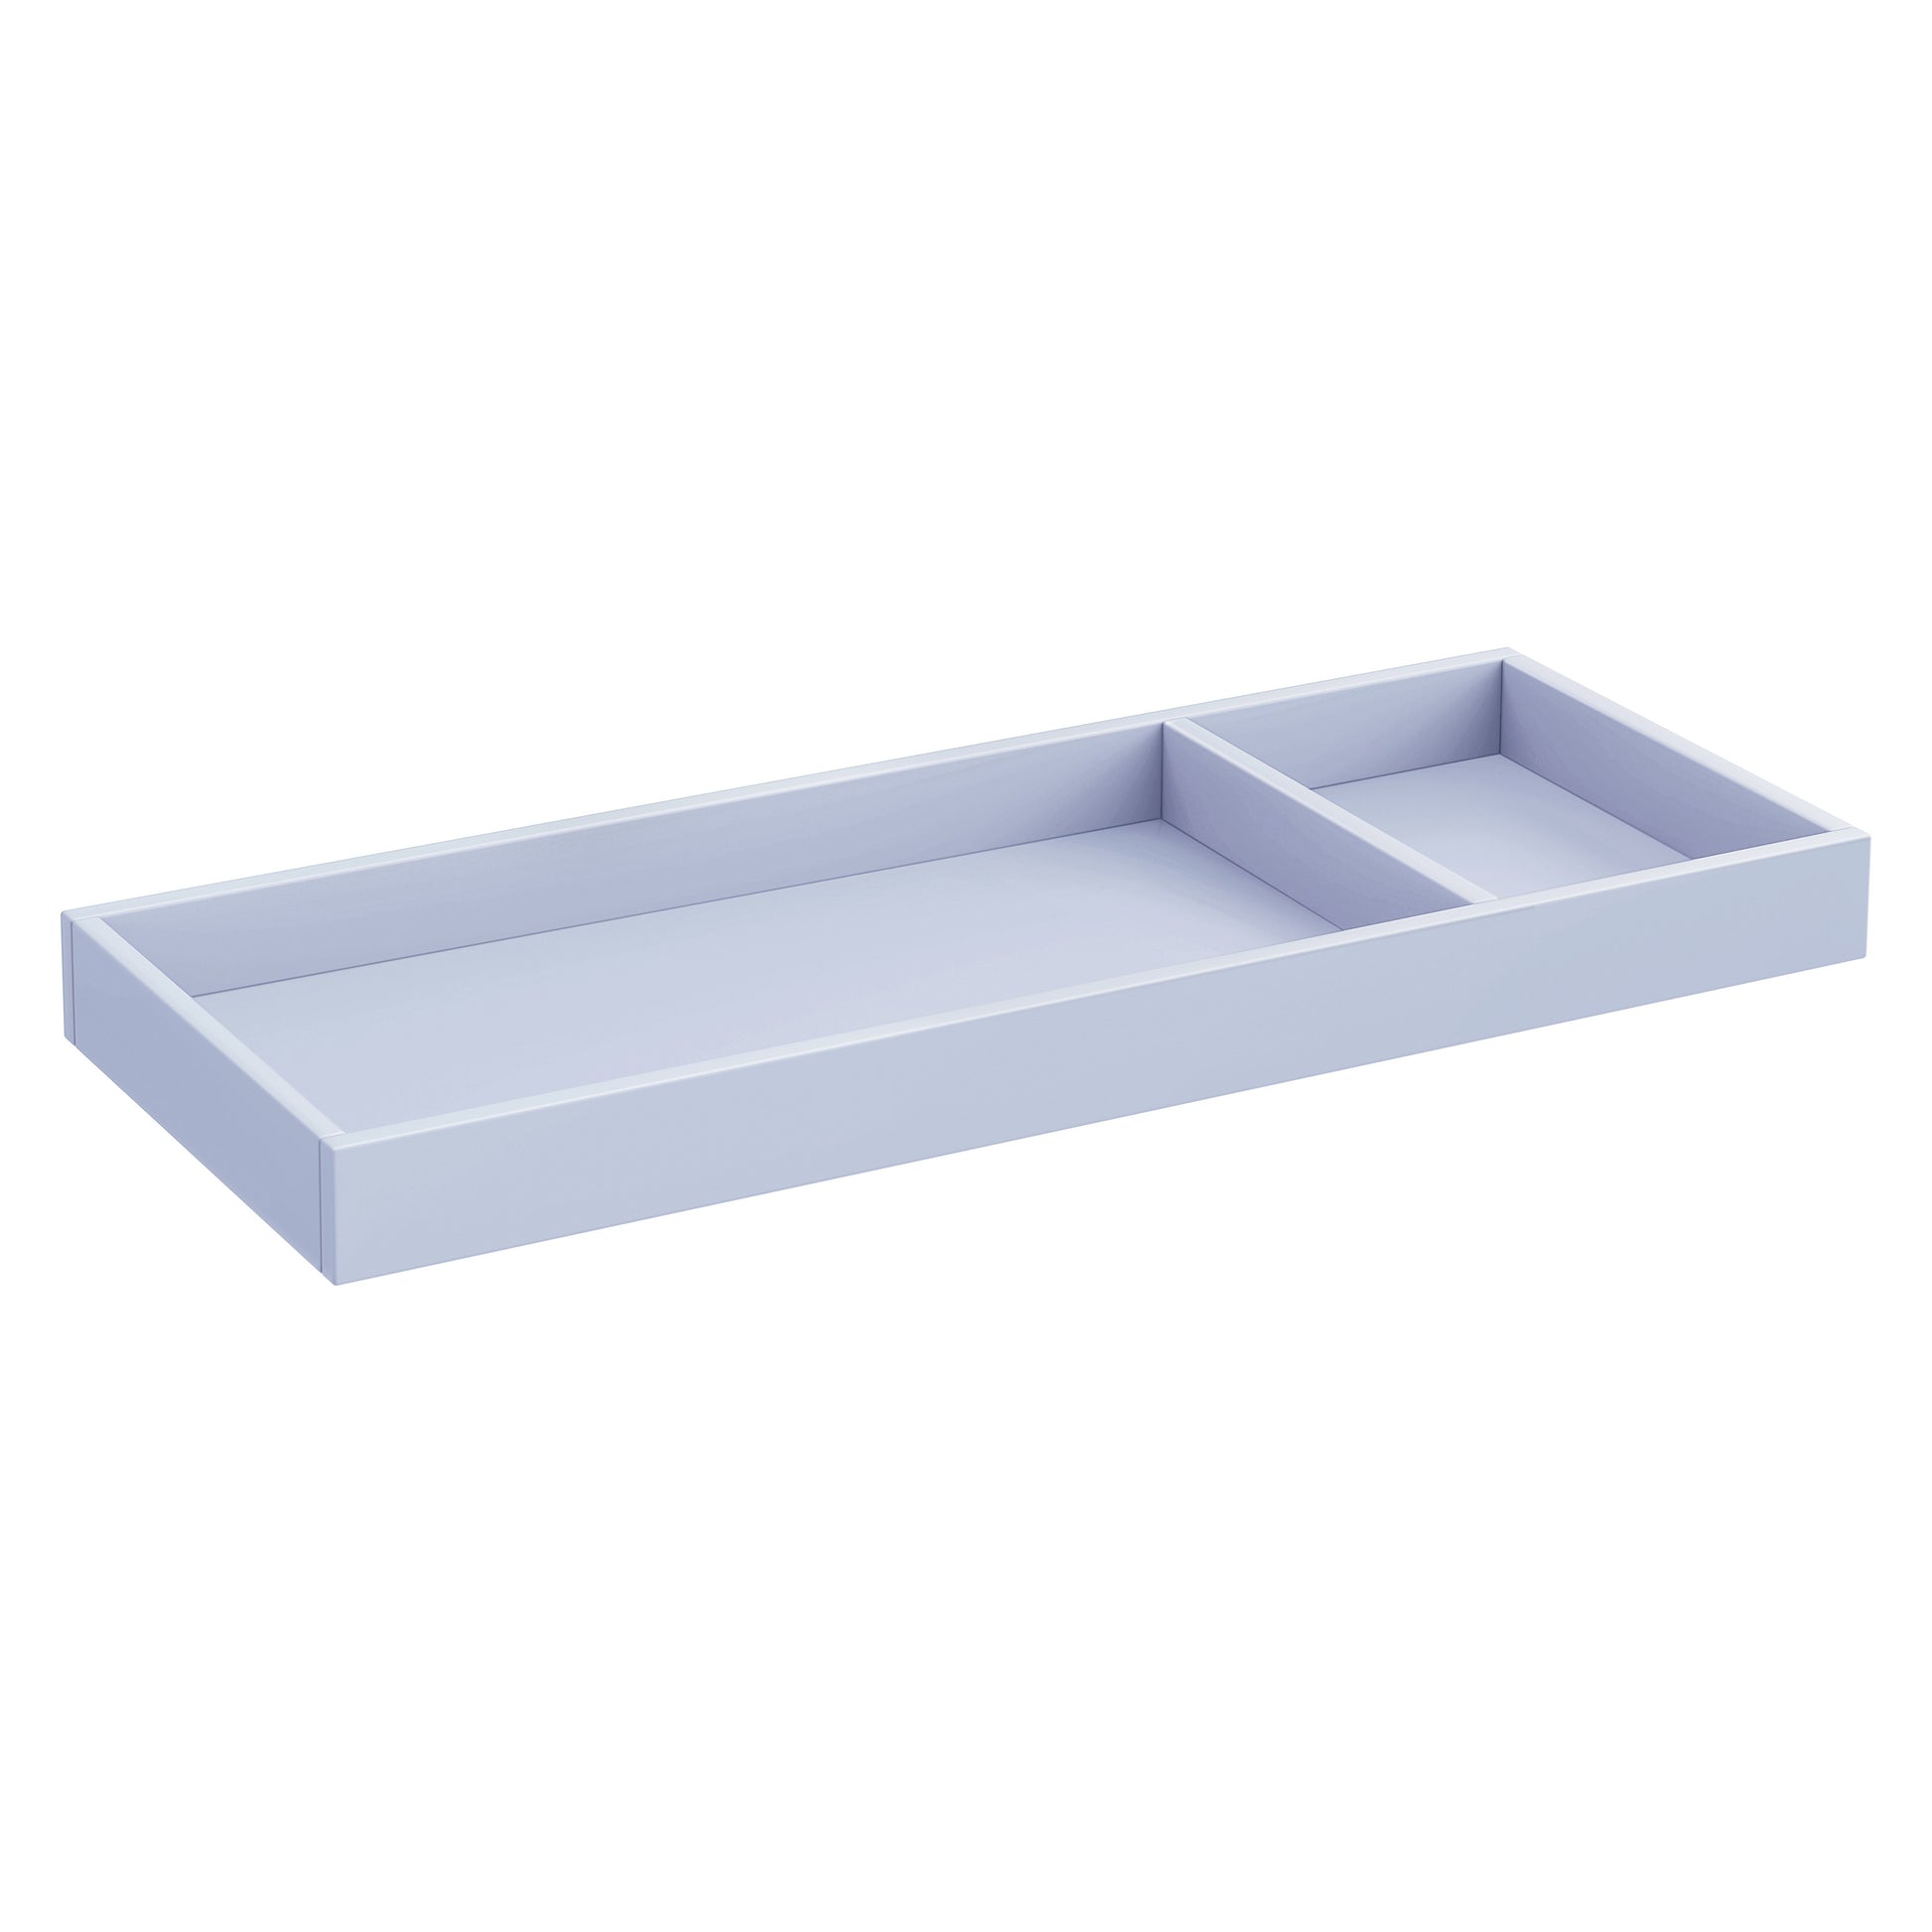 M0619PB,Universal Wide Removable Changing Tray in Powder Blue